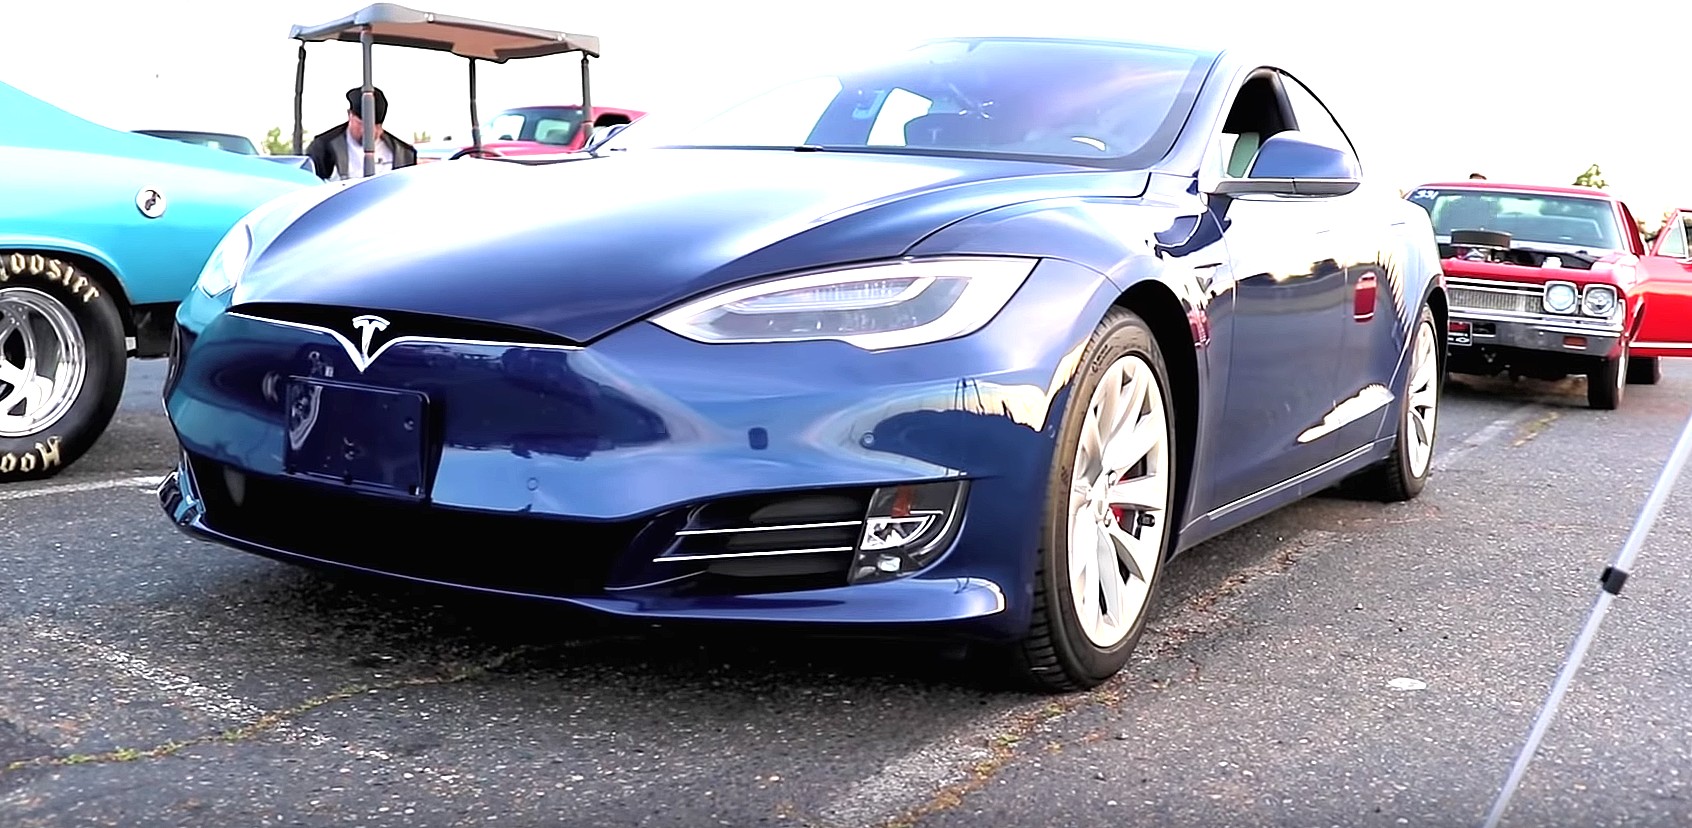 Refreshed Tesla Model S Performance Sets 1 4 Mile Record Straight From The Factory